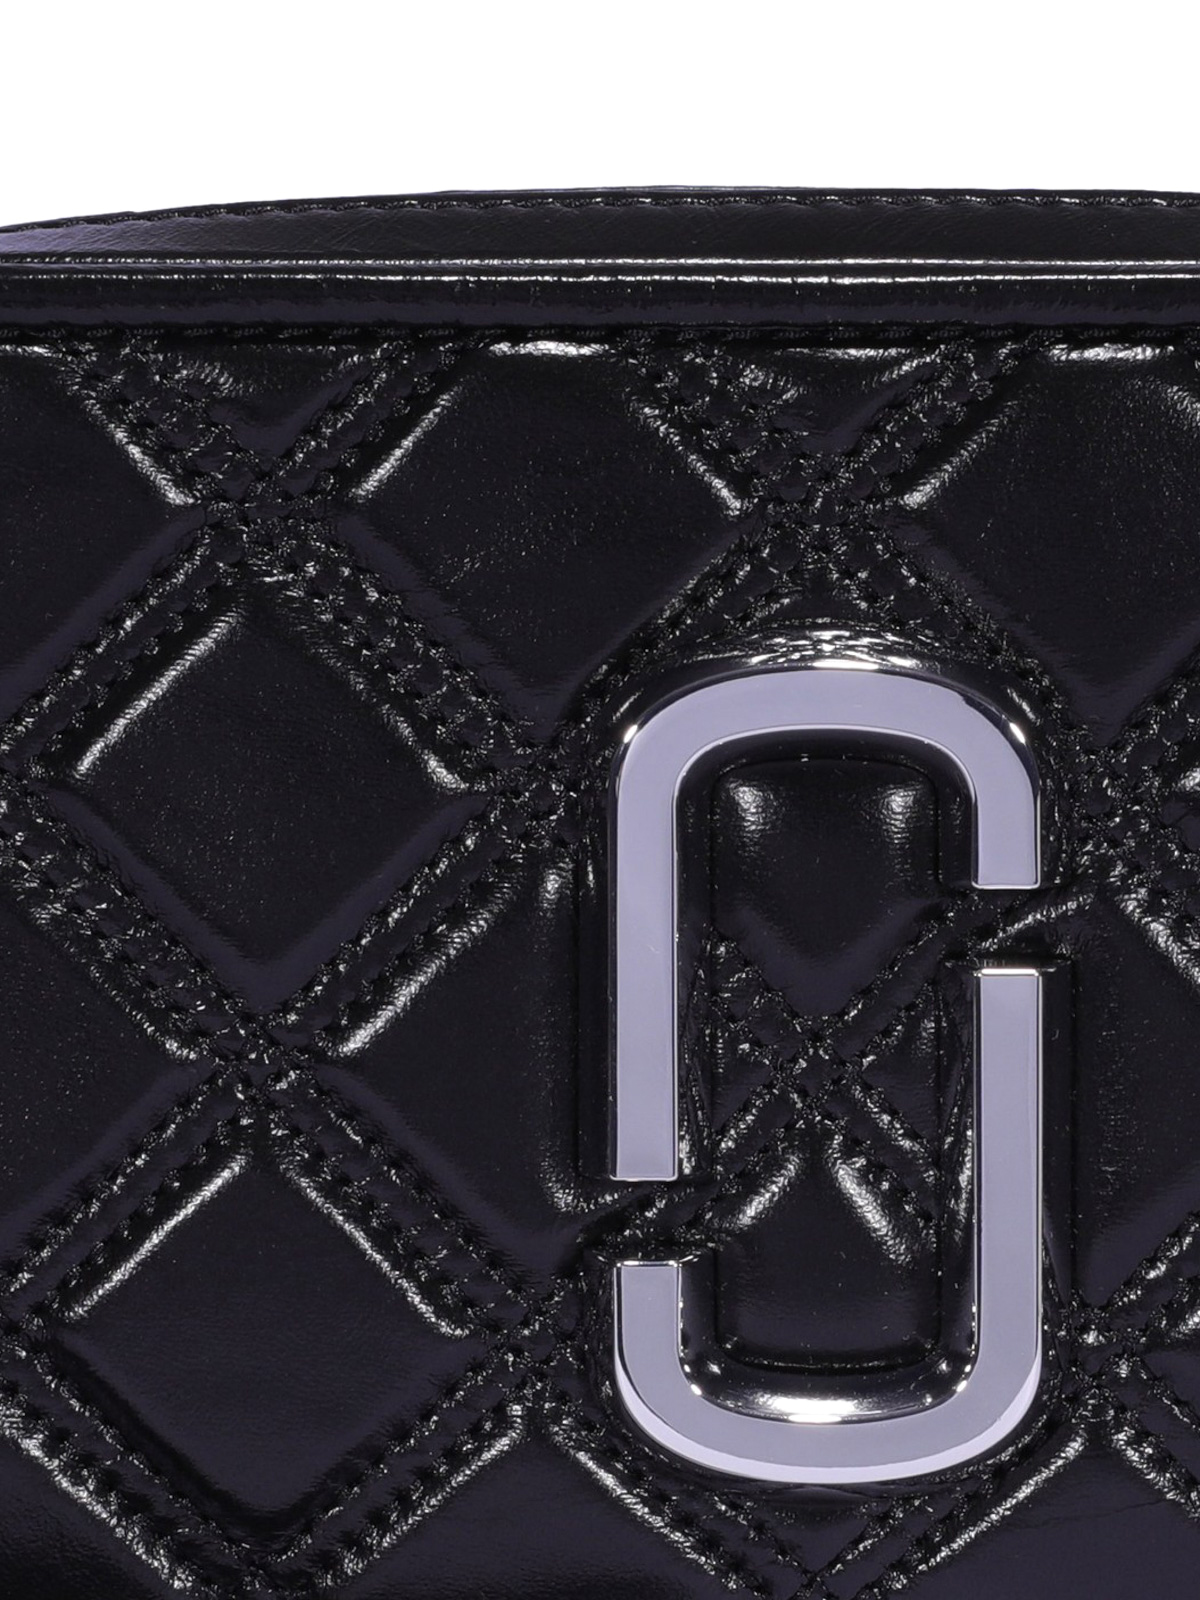 The Marc Jacobs Softshot 21 Quilted Black Crossbody